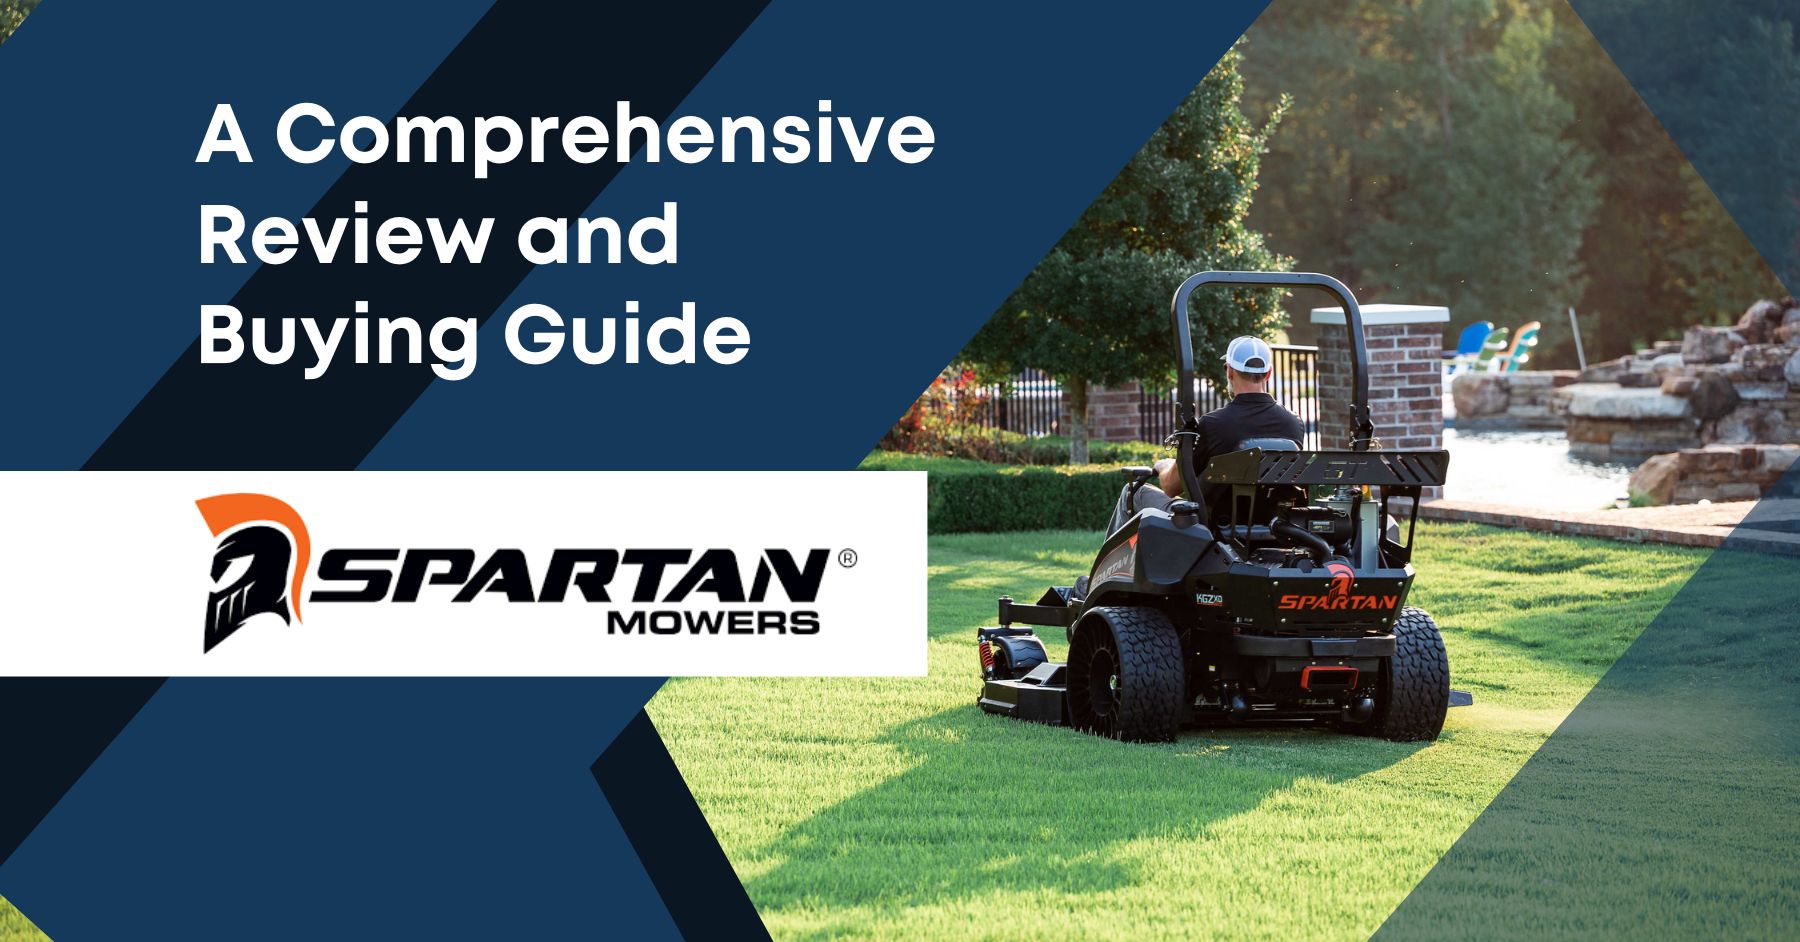 Spartan Mowers: A Comprehensive Review and Buyer’s Guide